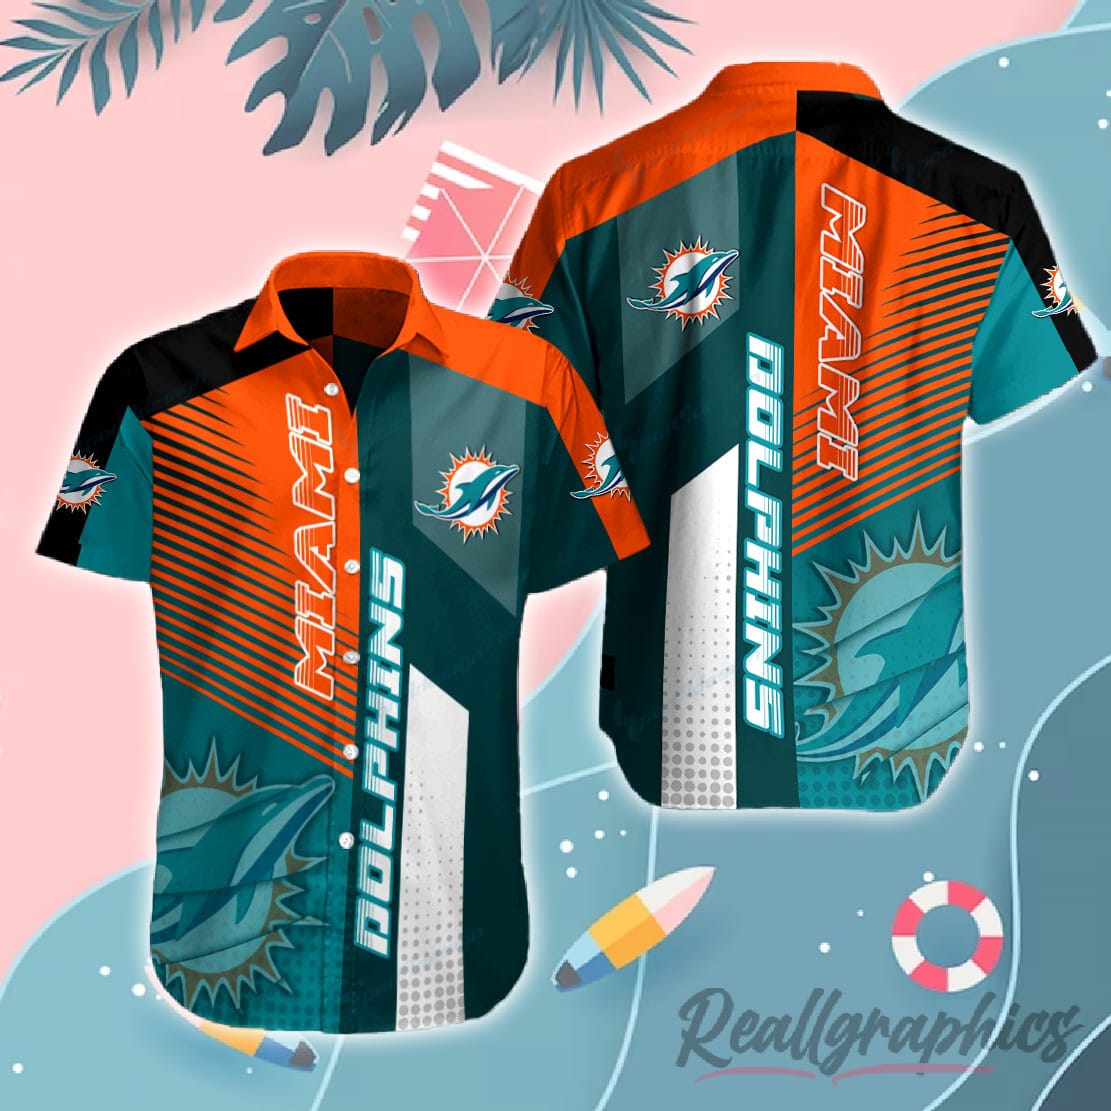 Miami Dolphins NFL Football Button Up Shirt - Reallgraphics